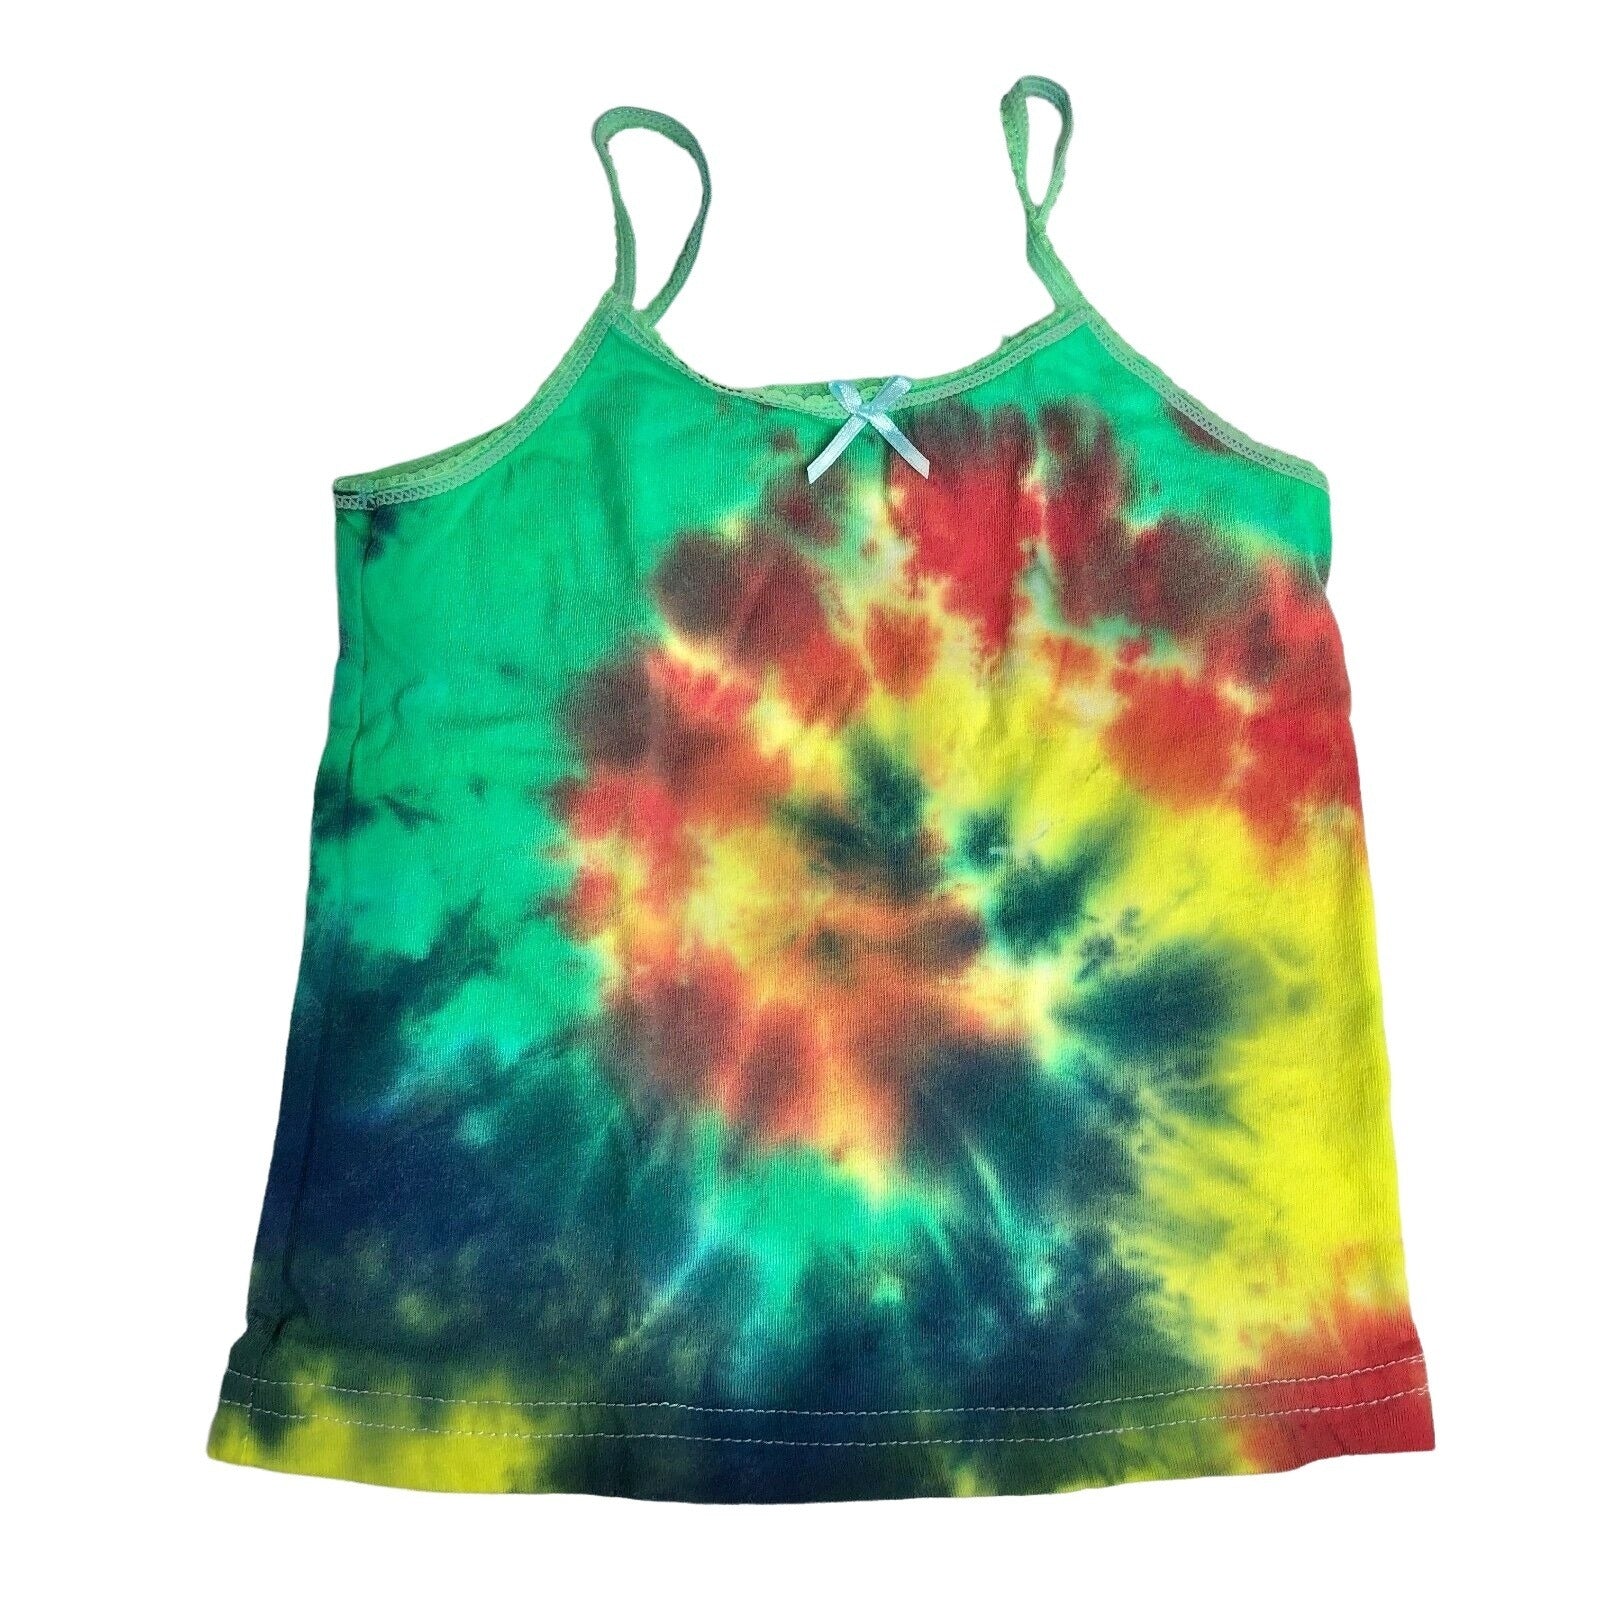 Tie-Dye Cotton Girls Tank Top 2-3T Blue Green Red Yellow Hand Dyed